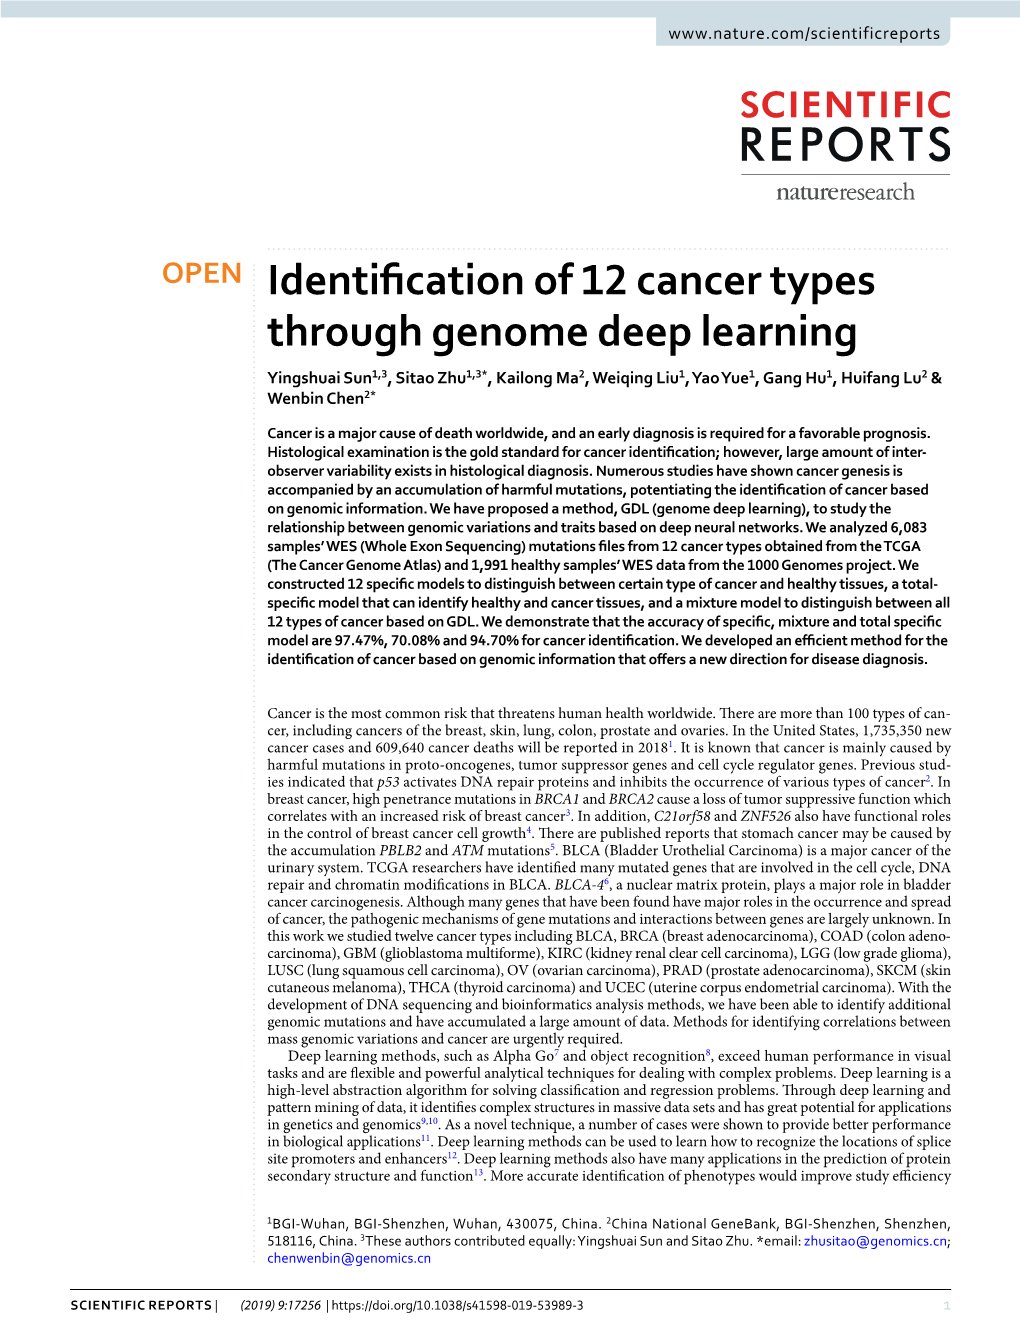 Identification of 12 Cancer Types Through Genome Deep